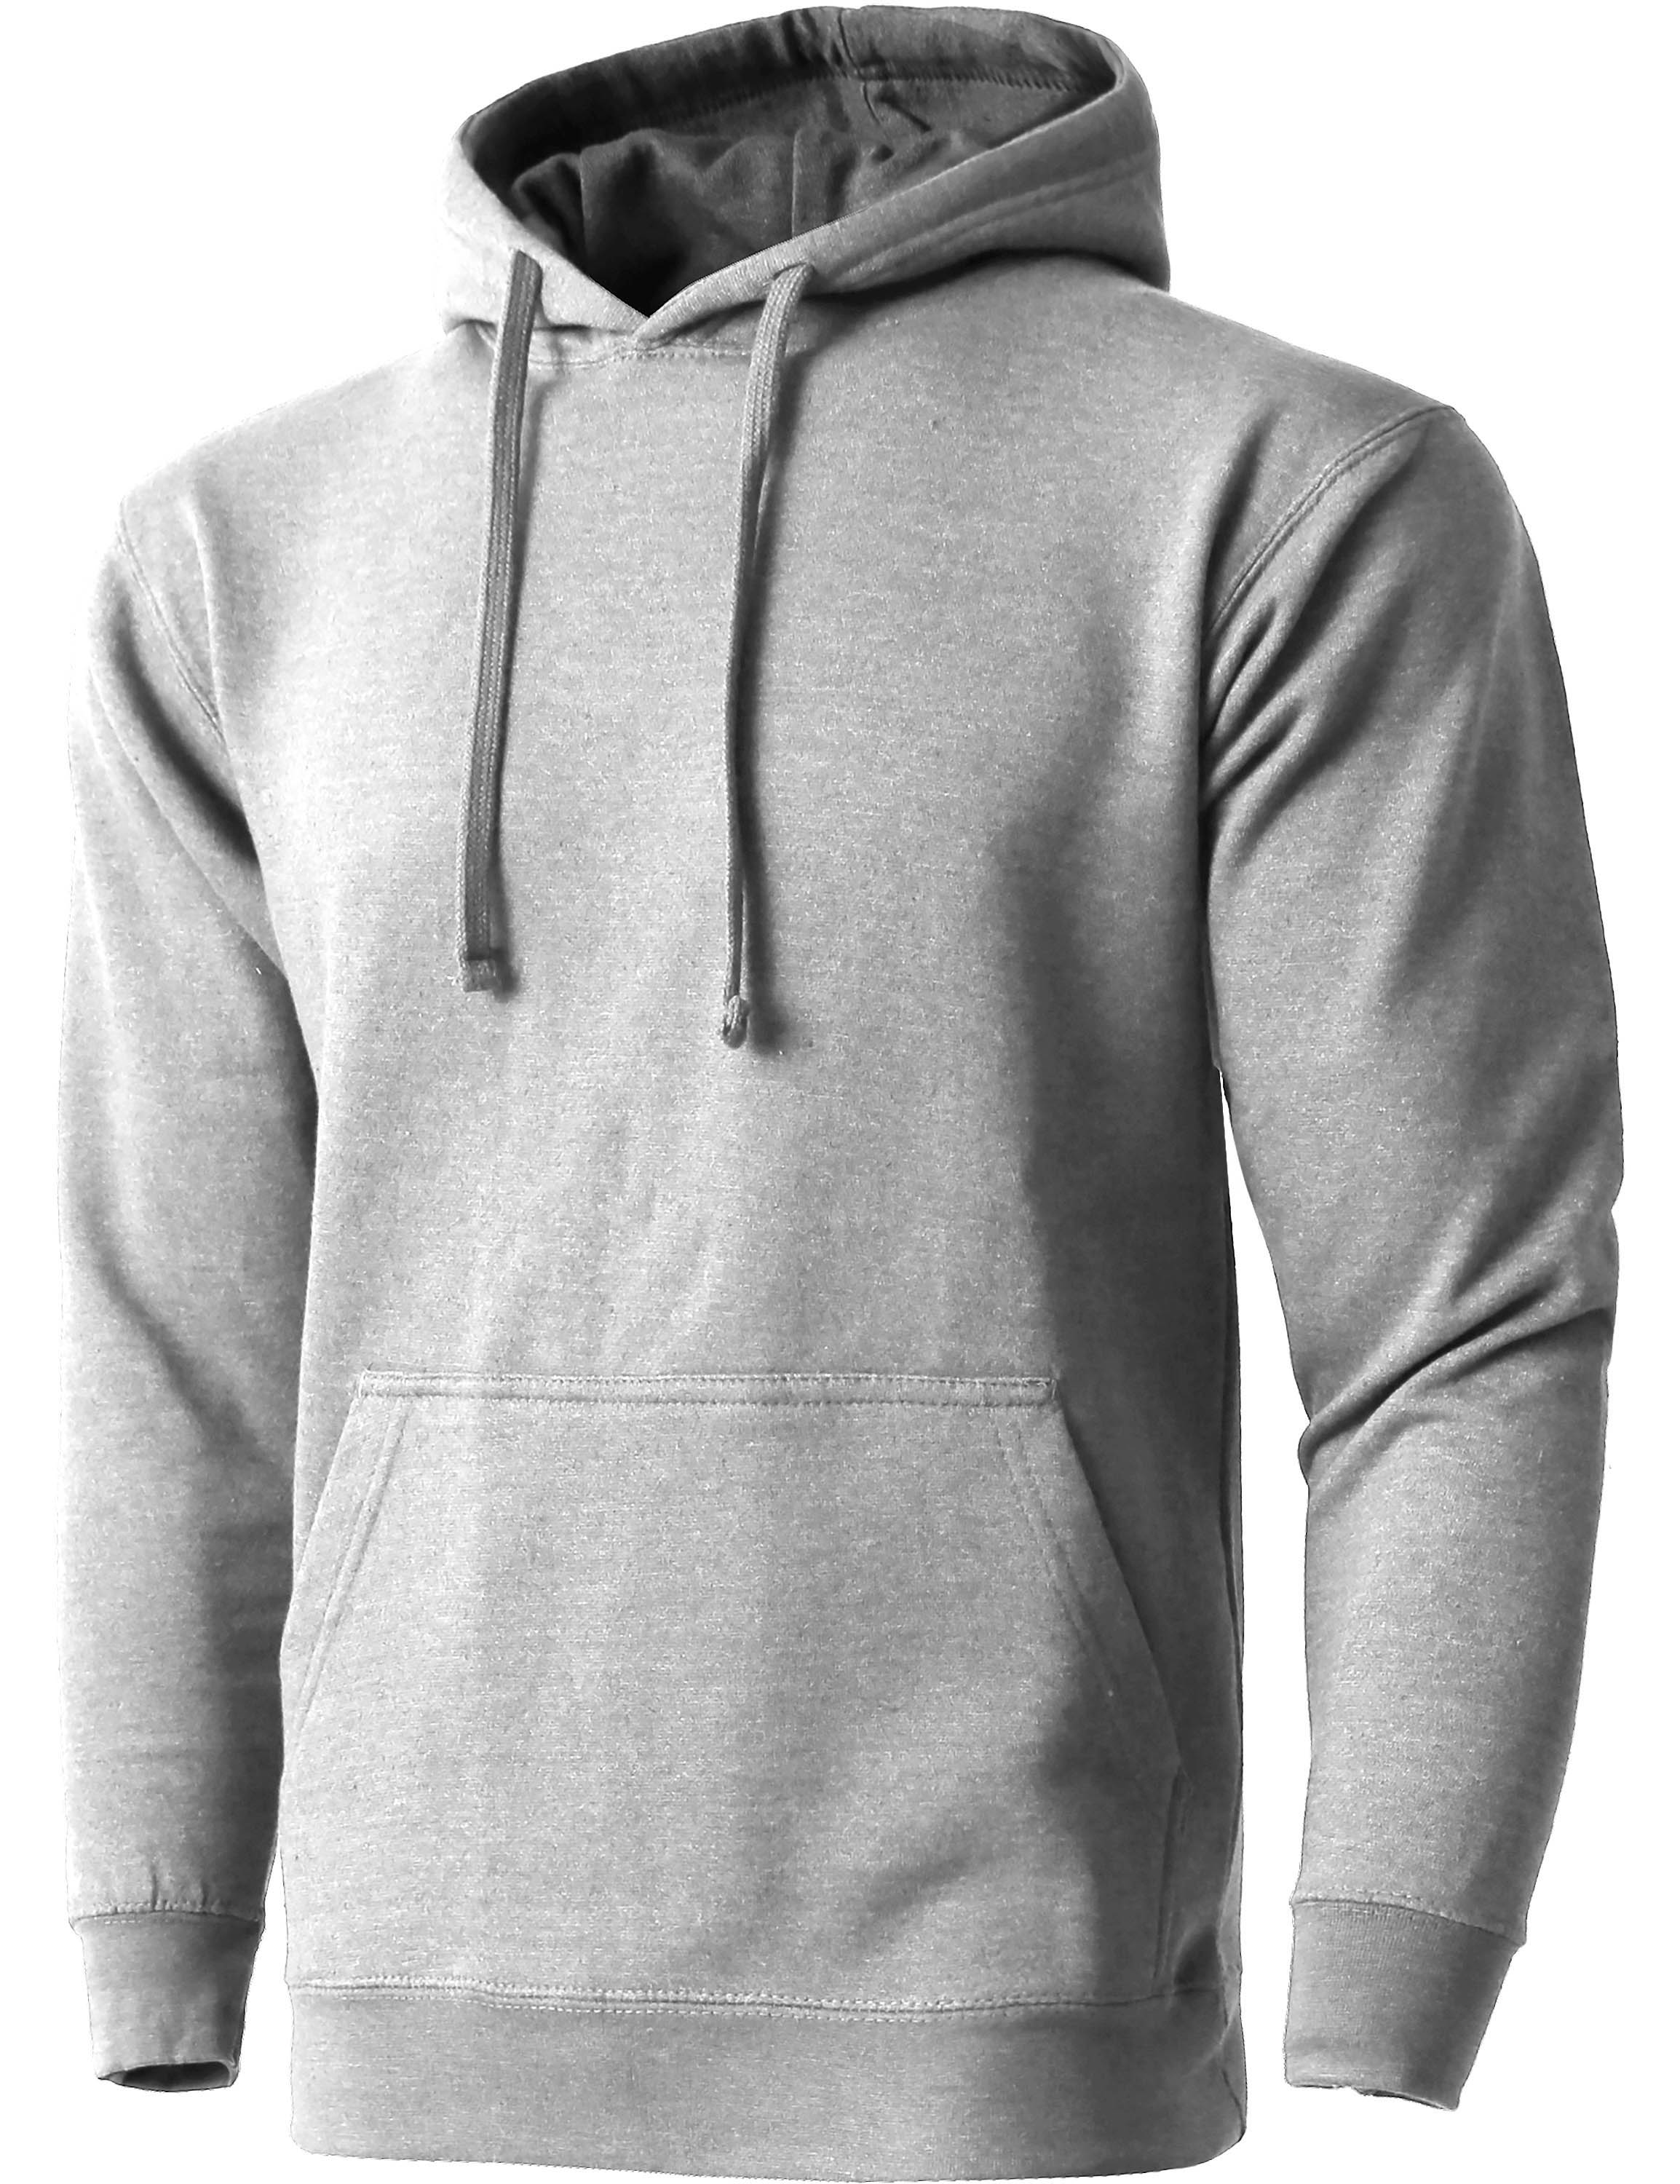 Hat and Beyond Mens Premium Pullover Hoodie Heavyweight Fleece Casual ...